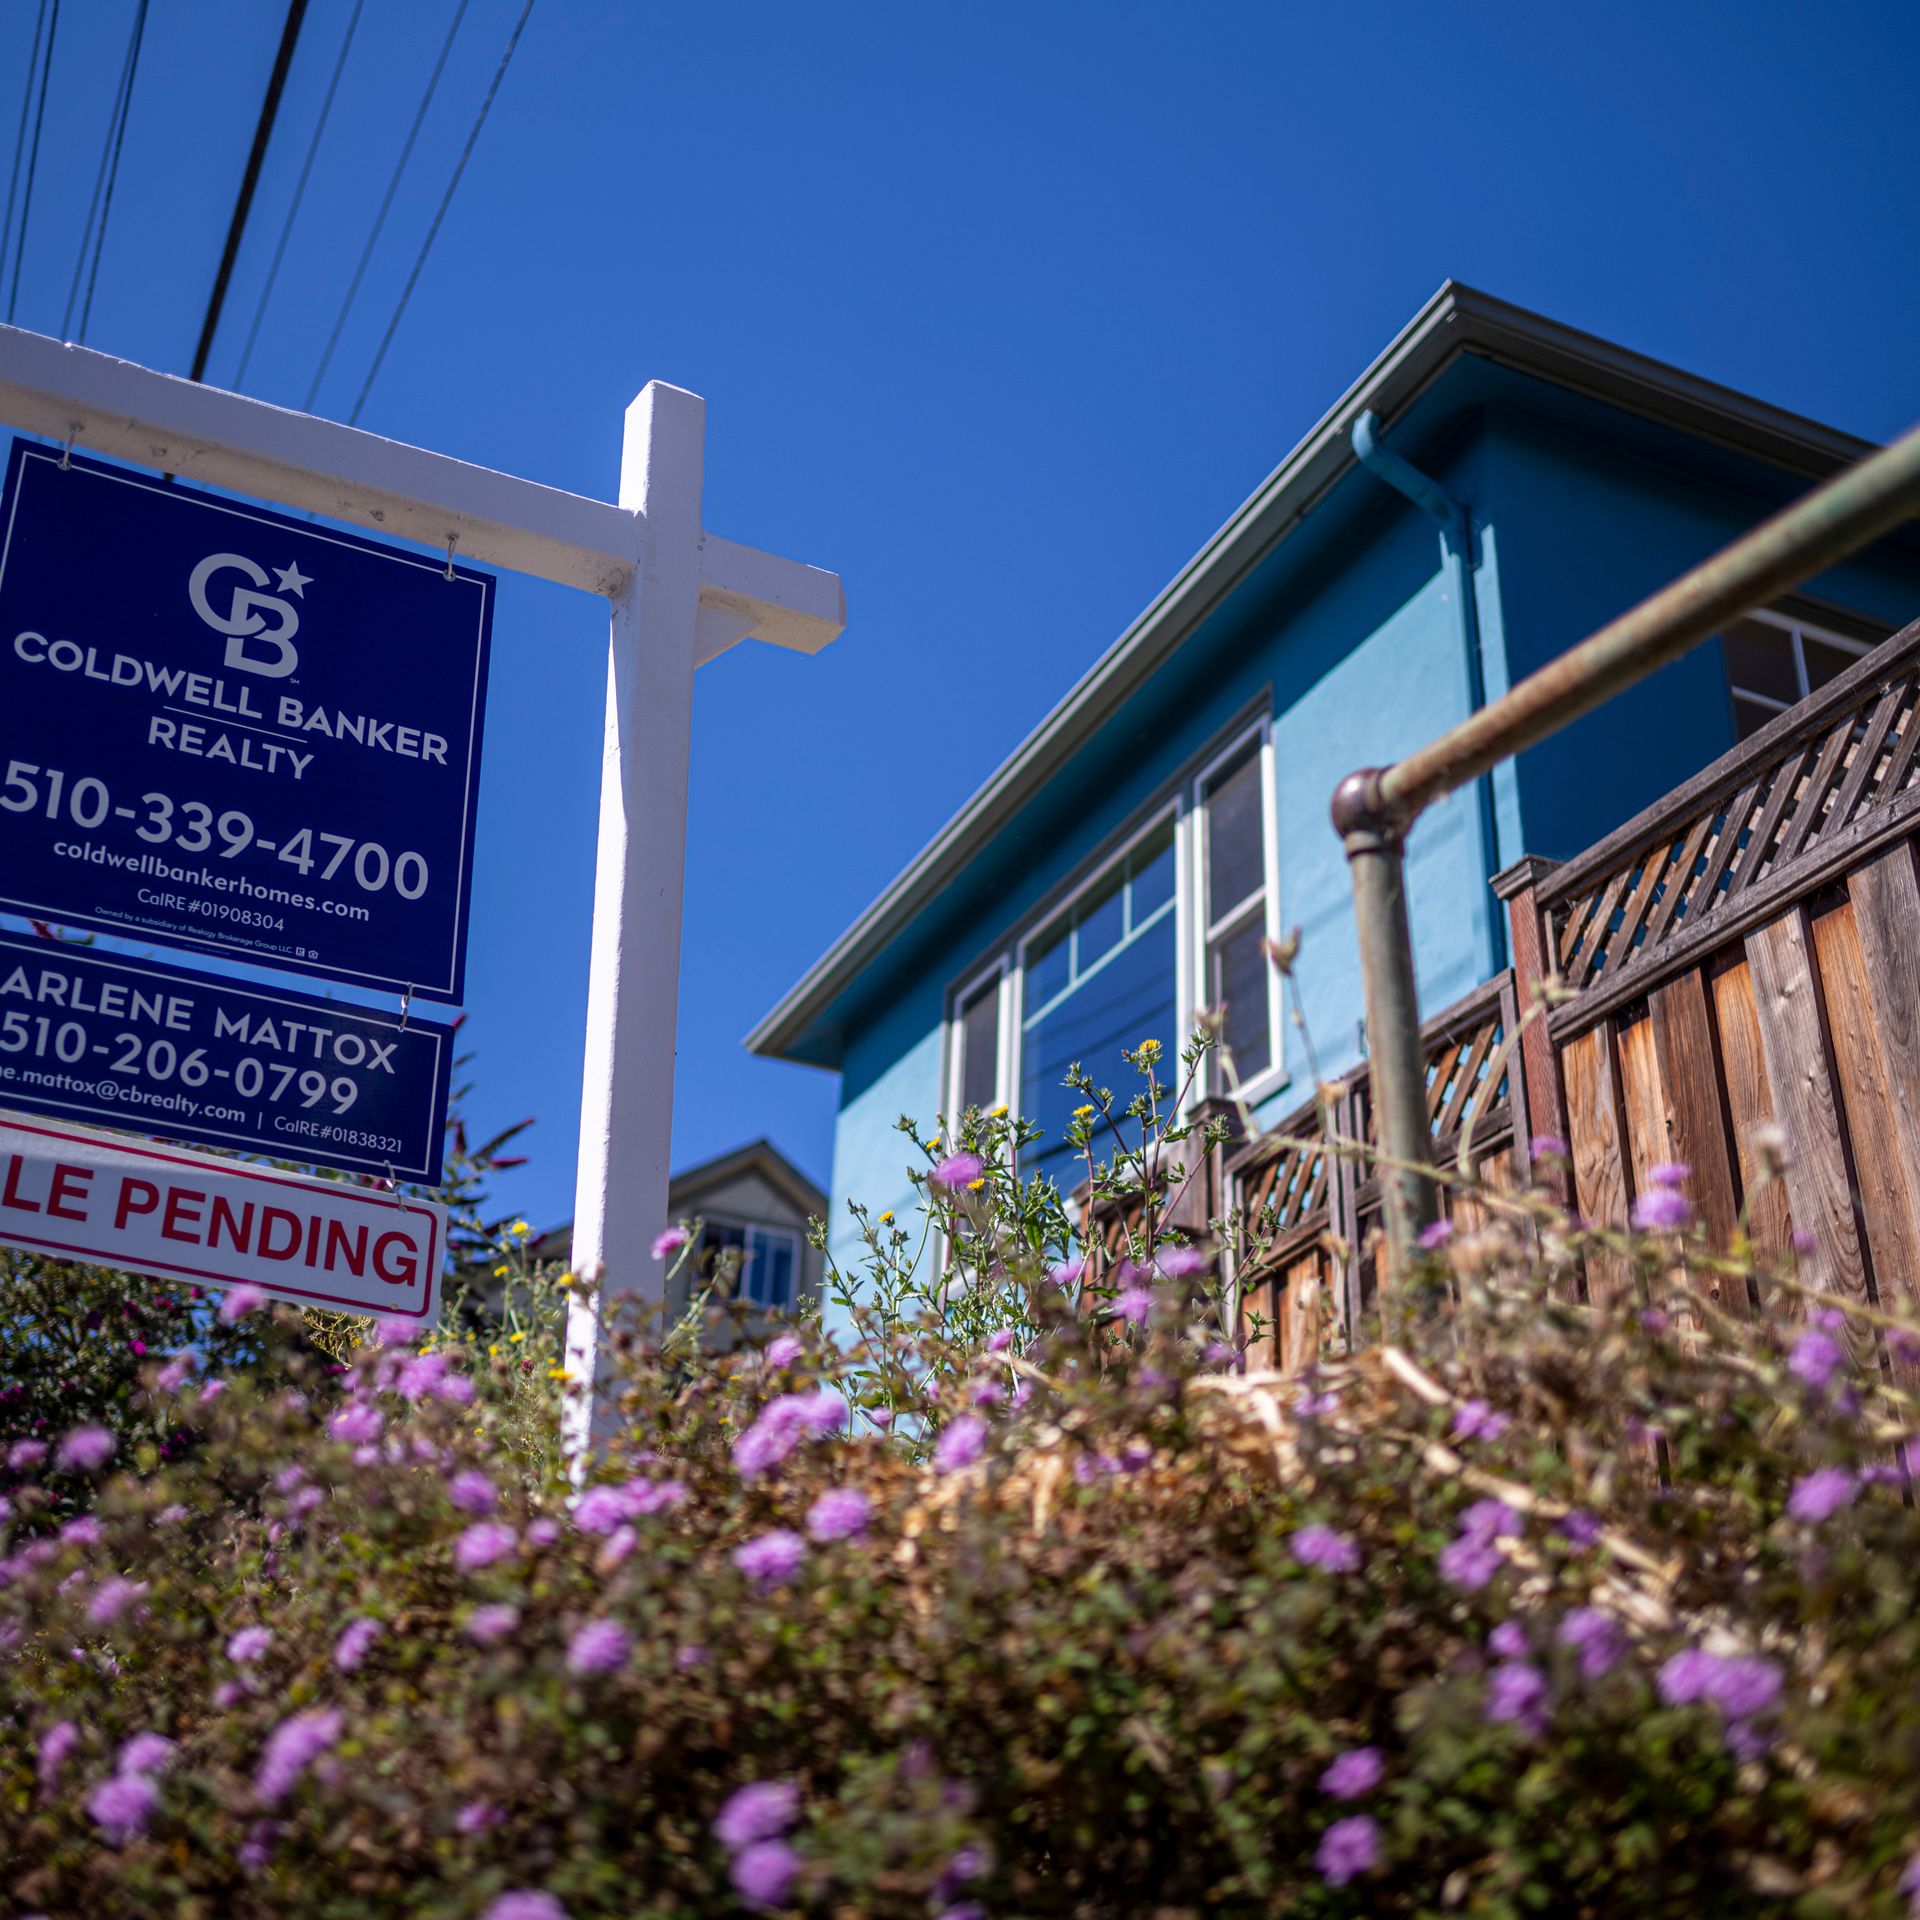 A "For Sale" sign outside a house in Crockett, California, on May 31, 2022.